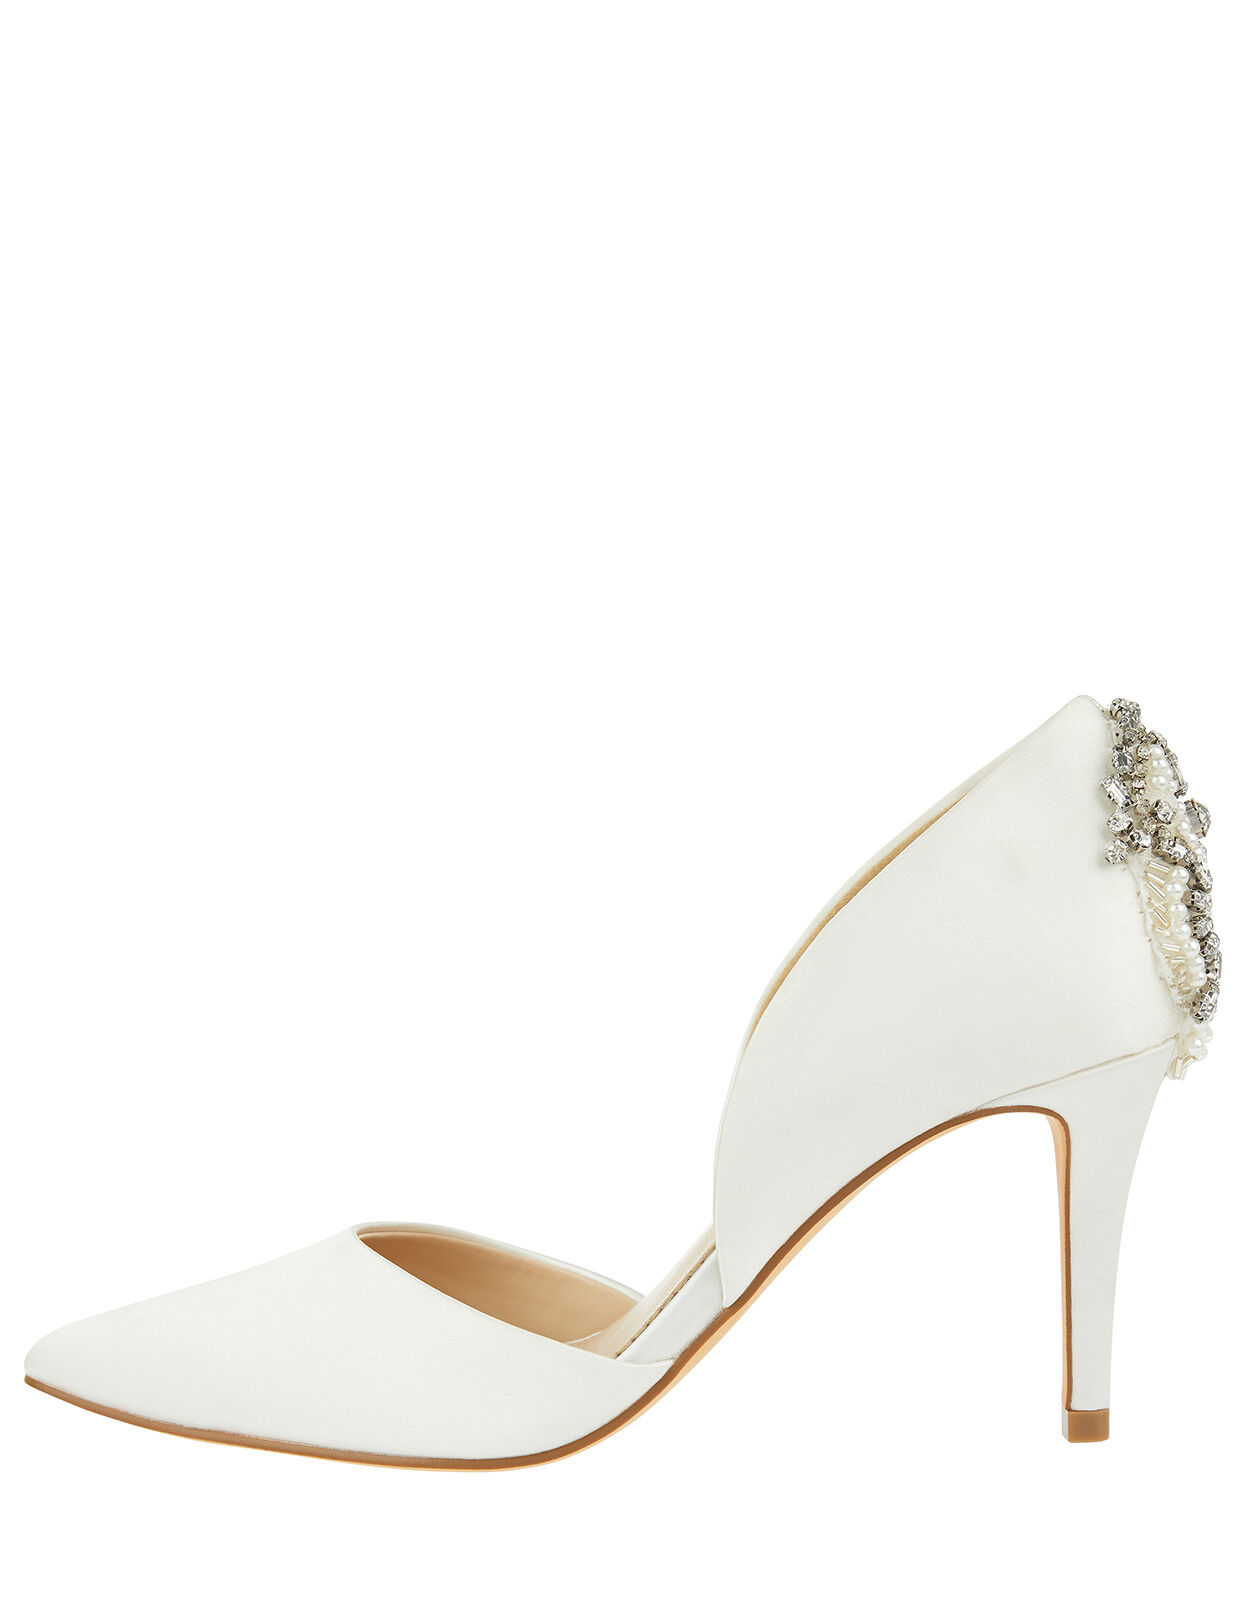 ivory satin court shoes